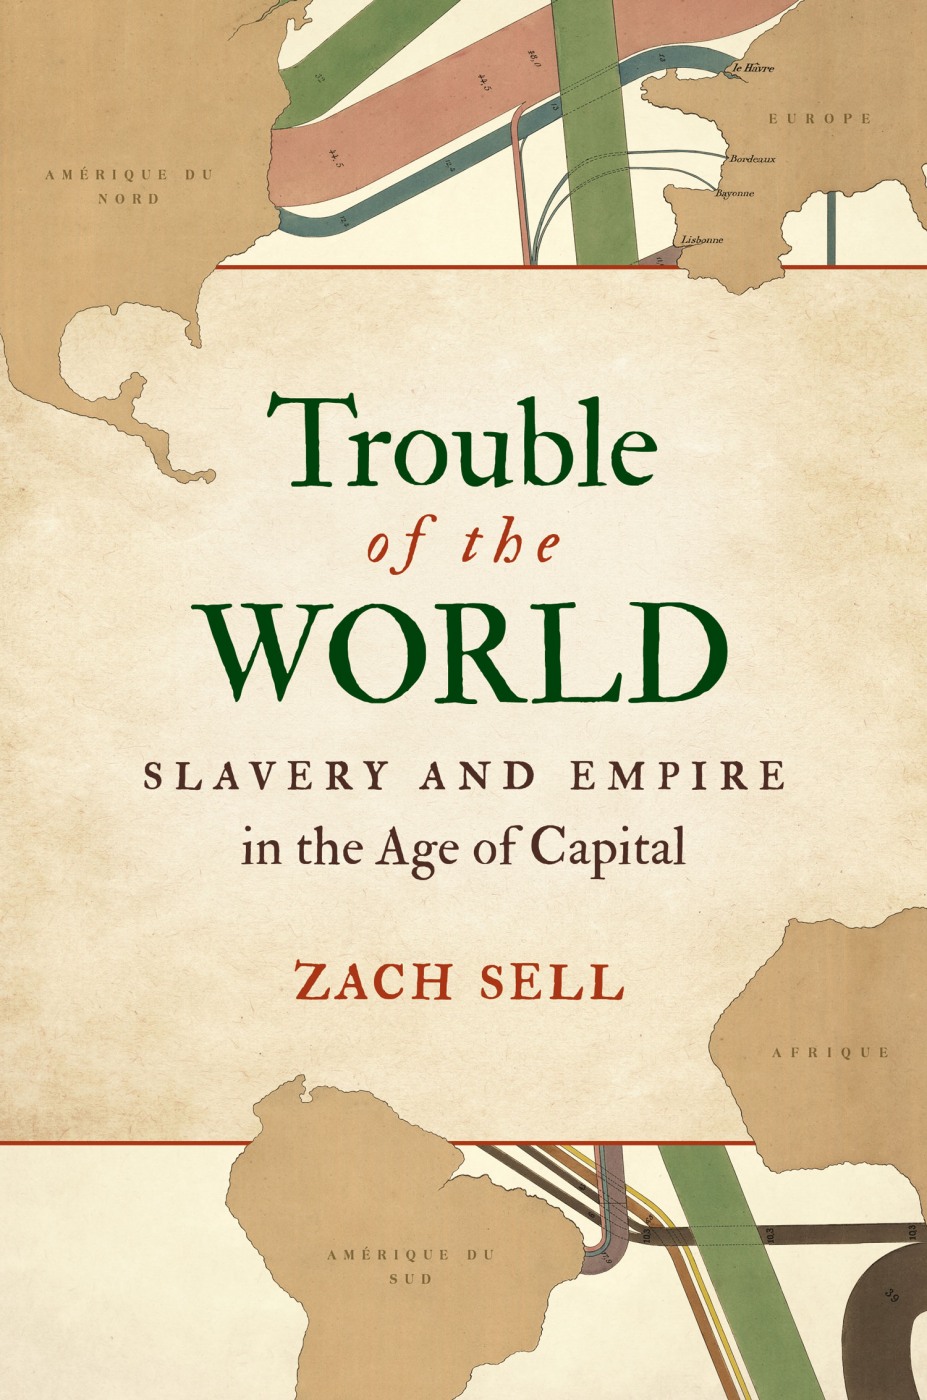 Trouble of the World by Zach Sell